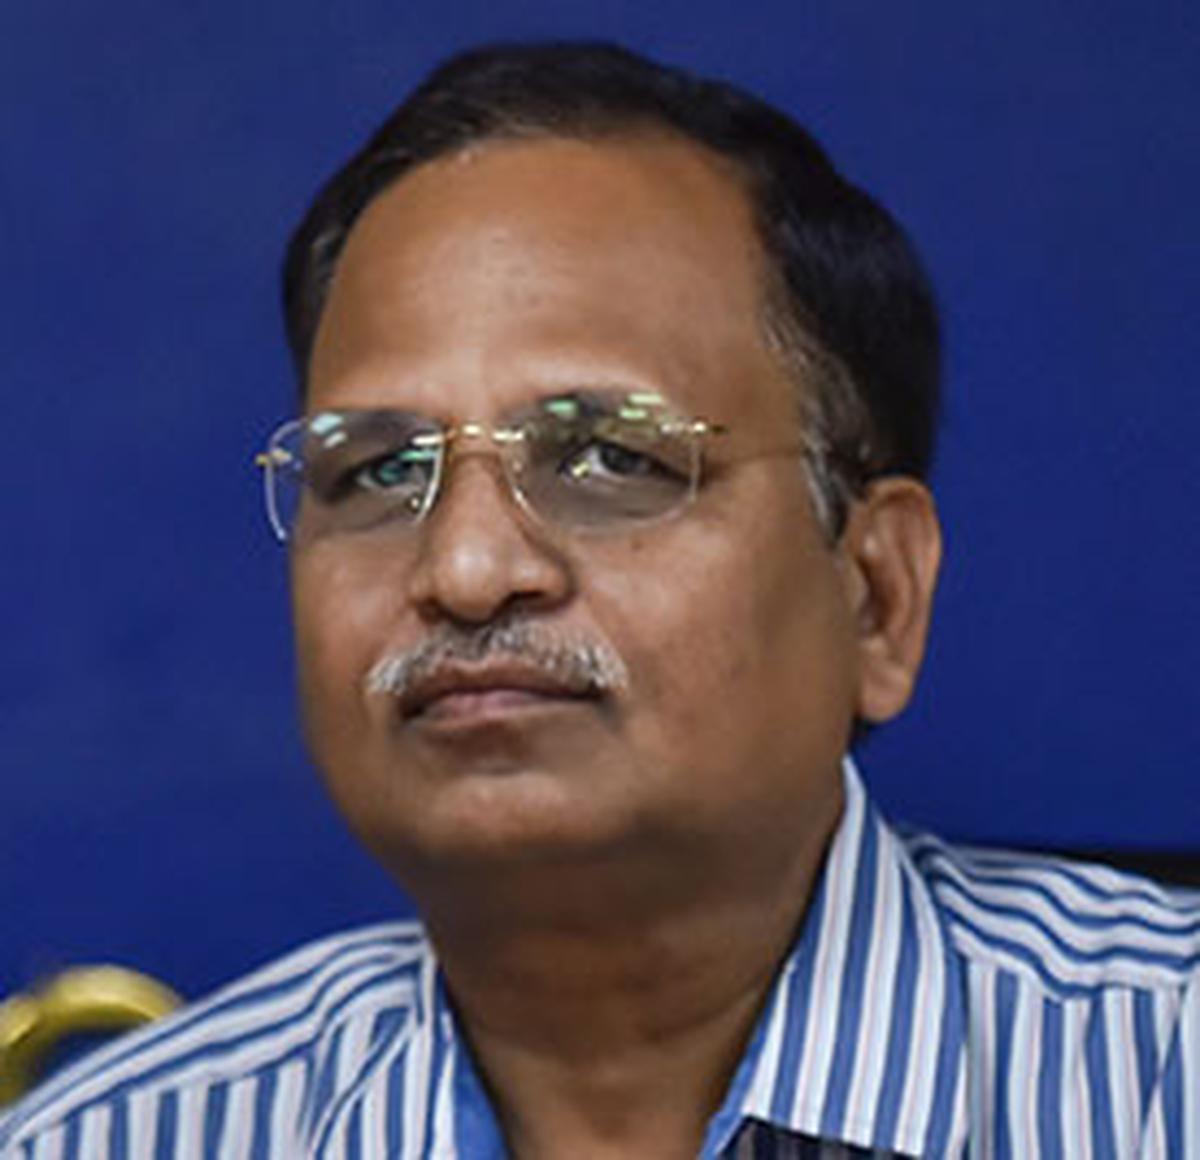 Delhi Minister Satyendar Jain 'misused' official position to meet co-accused in jail cell: Sources